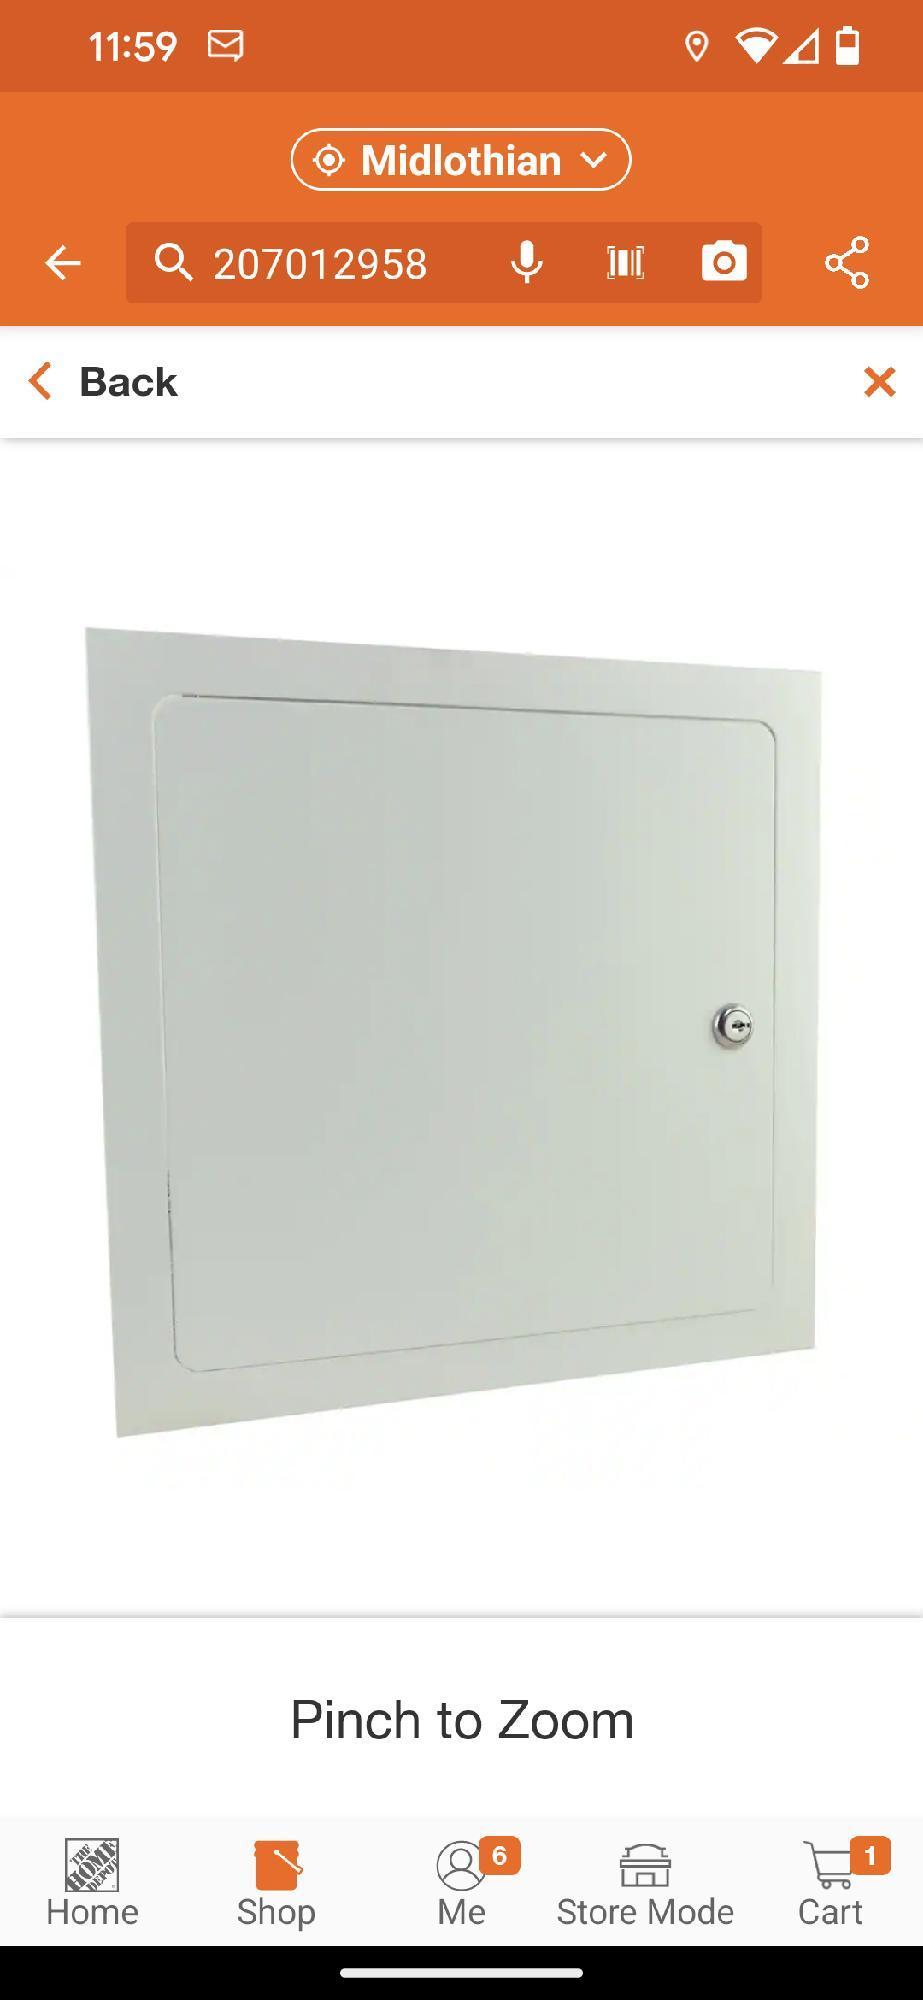 Elmdor 14 in. x 14 in. Metal Wall and Ceiling Access Panel, Appears to be New in Factory Sealed Box